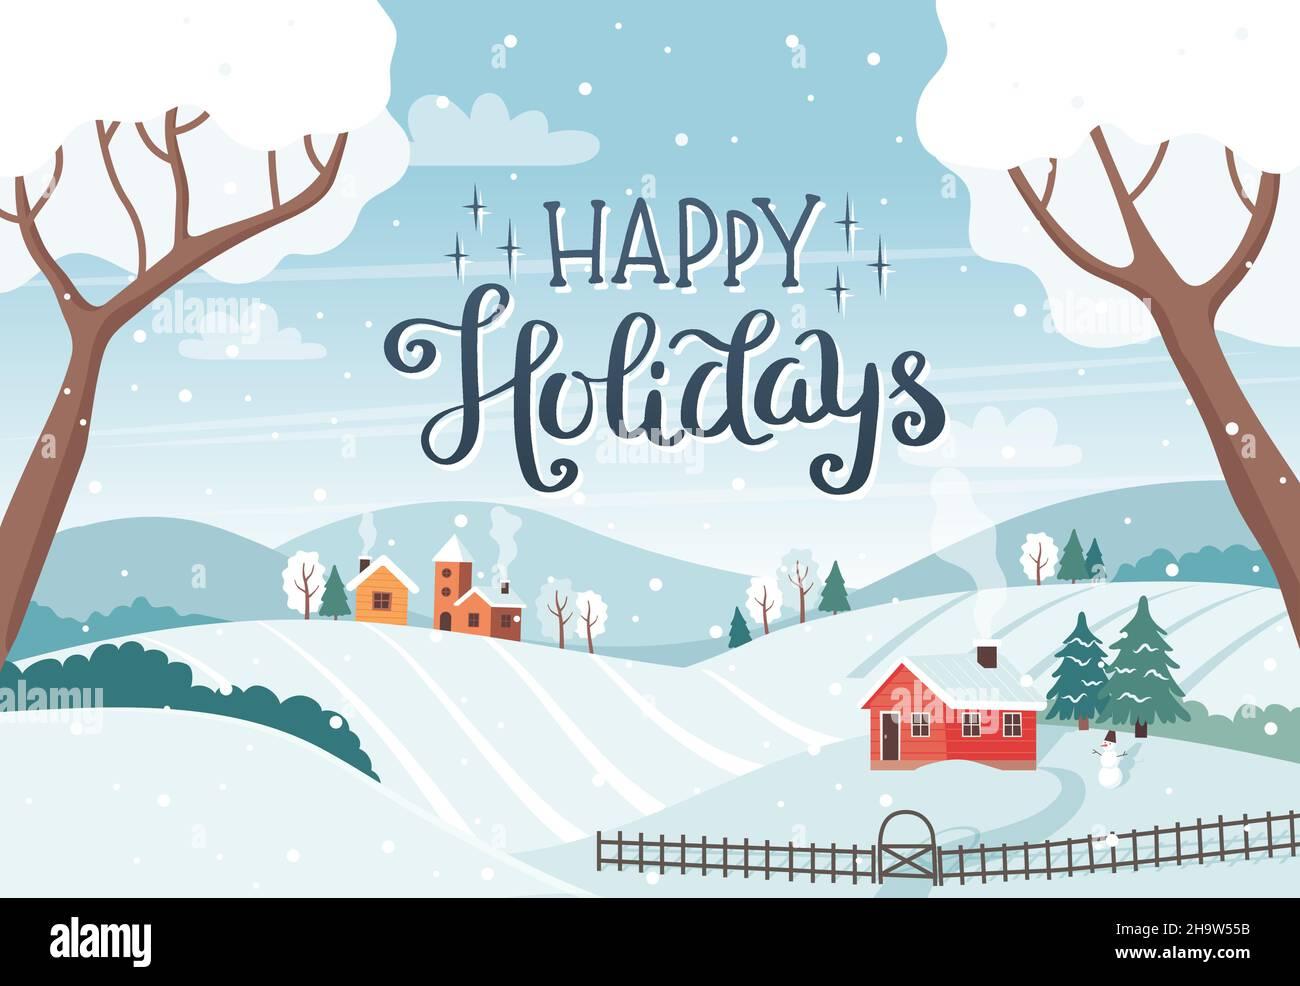 Happy Holidays Card Winter Landscape With Trees Fields Houses